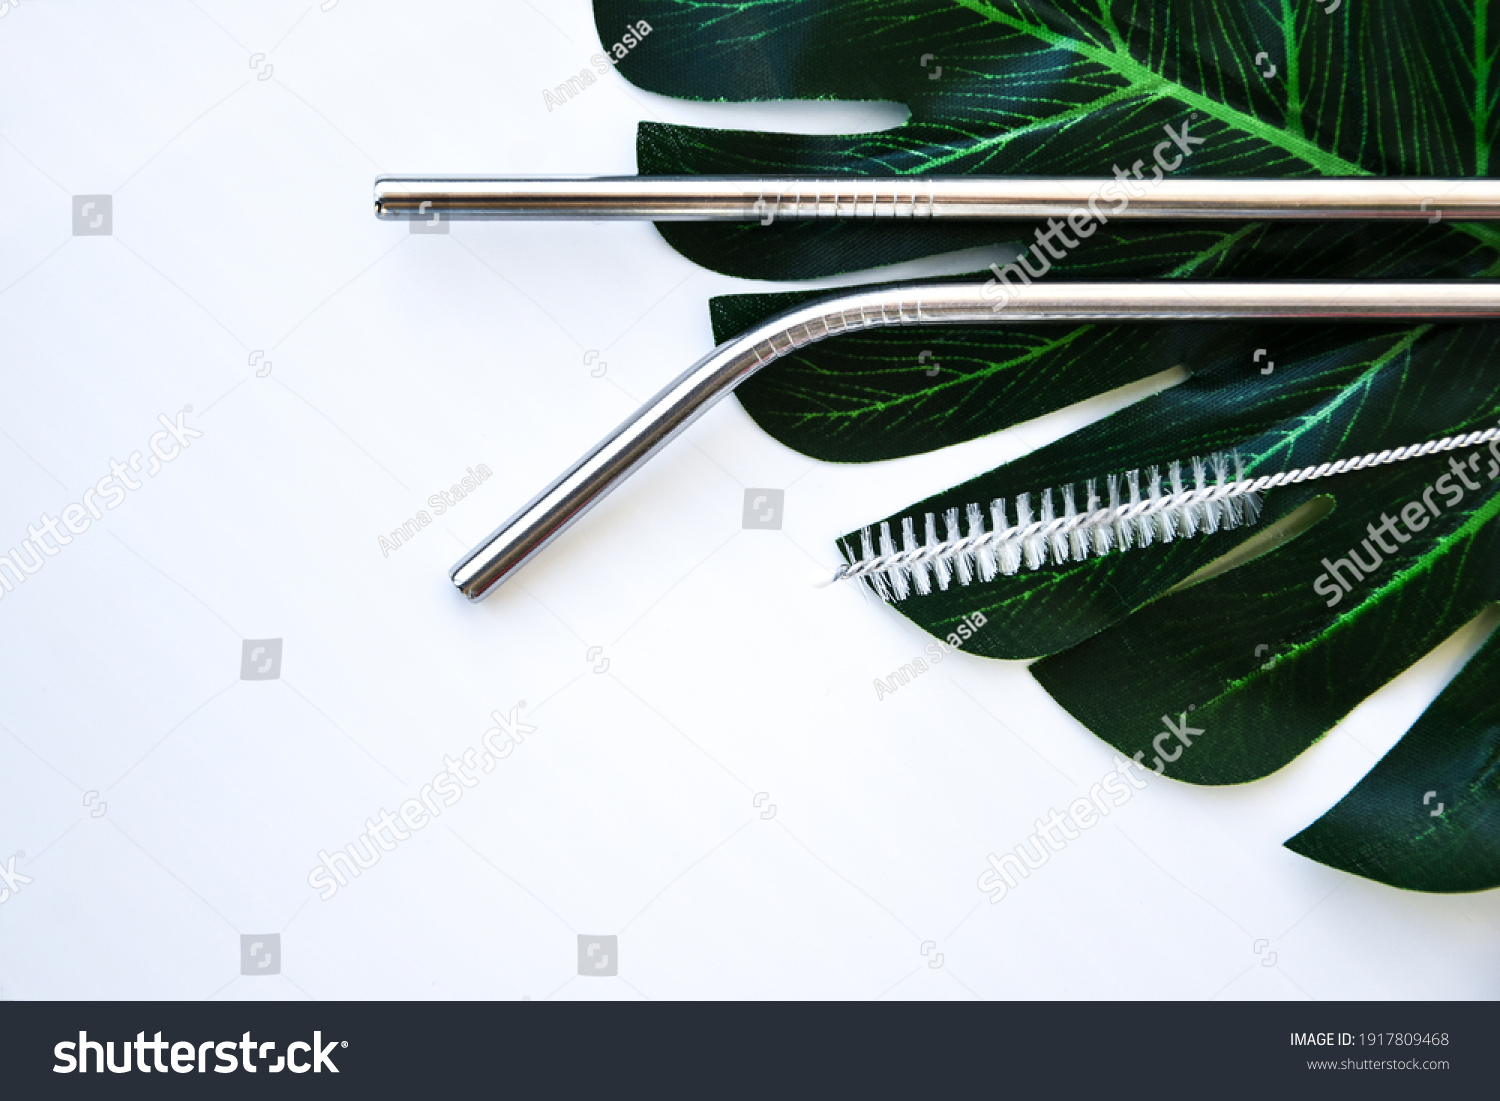 Reusable Metal Straws with Portable Case - Stainless Steel, Eco-Friendly Drinking Straw Set with Cleaning Brushes. Stainless Steel Metal Straws, Reusable Comfortable Rounded tip Drinking Straws #1917809468